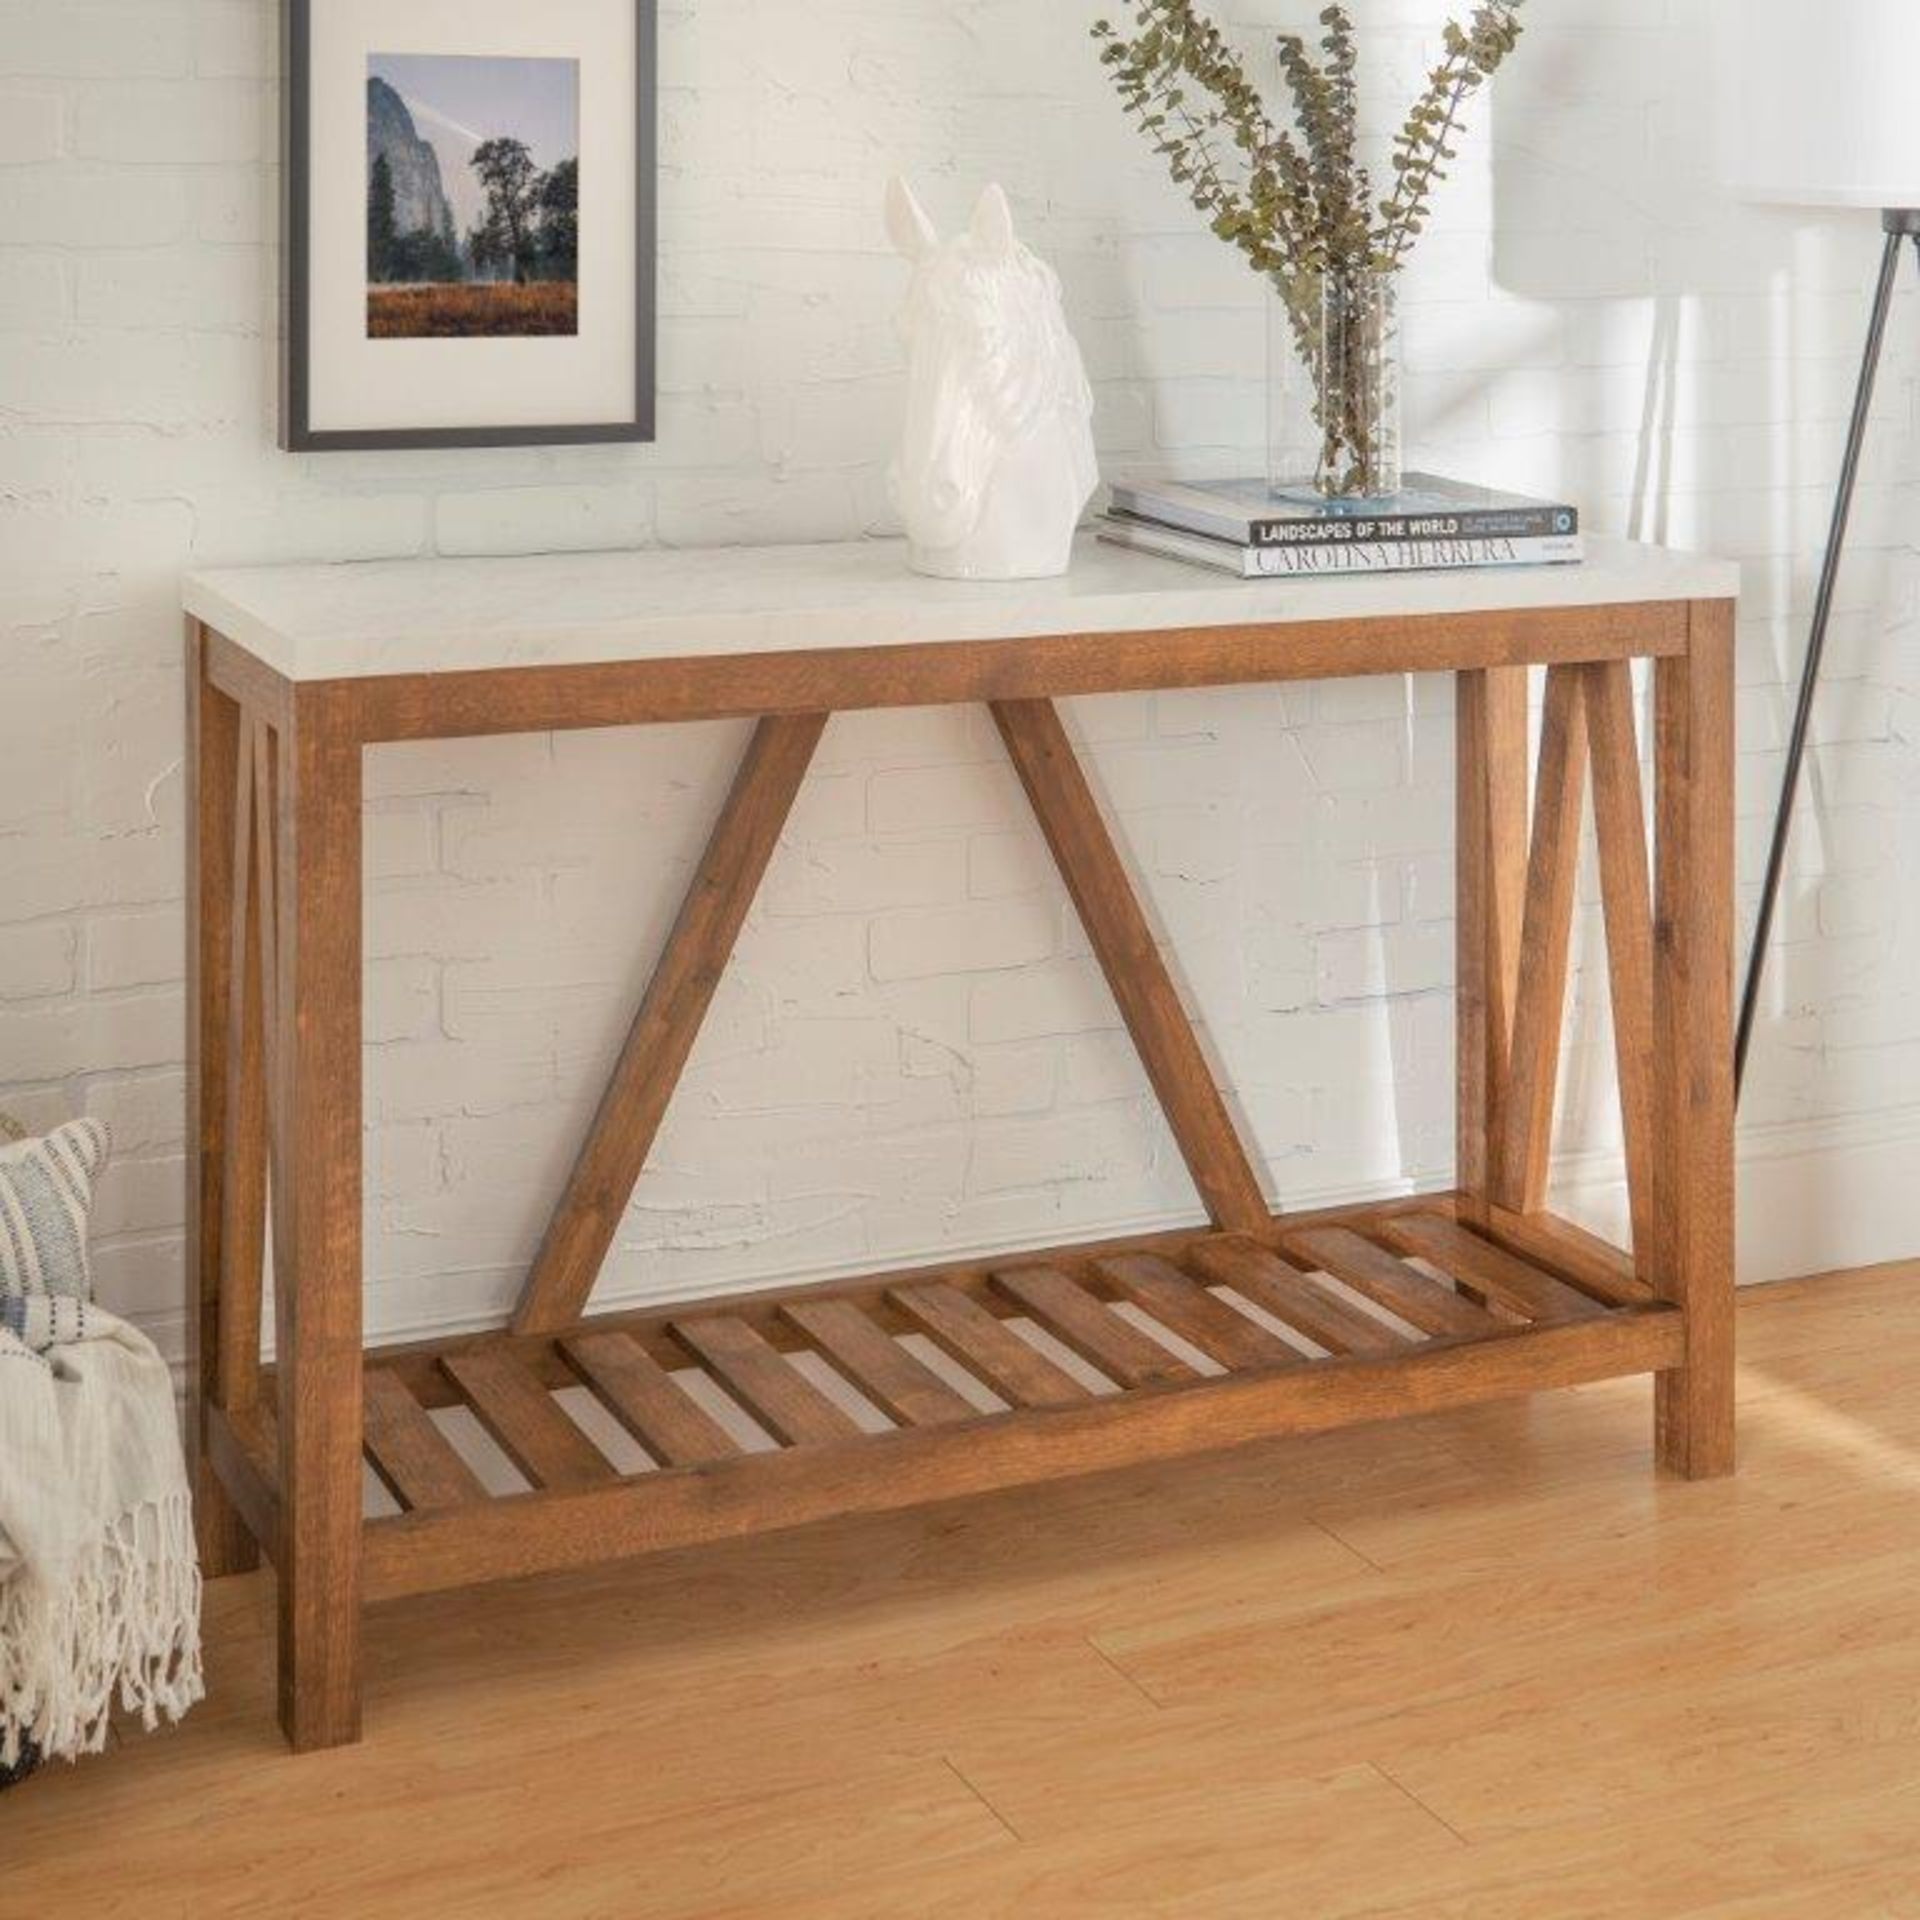 RRP £338 - NEW 52" Walnut & Marble Effect Rustic Entryway Table - 82 x 133 x 36cm